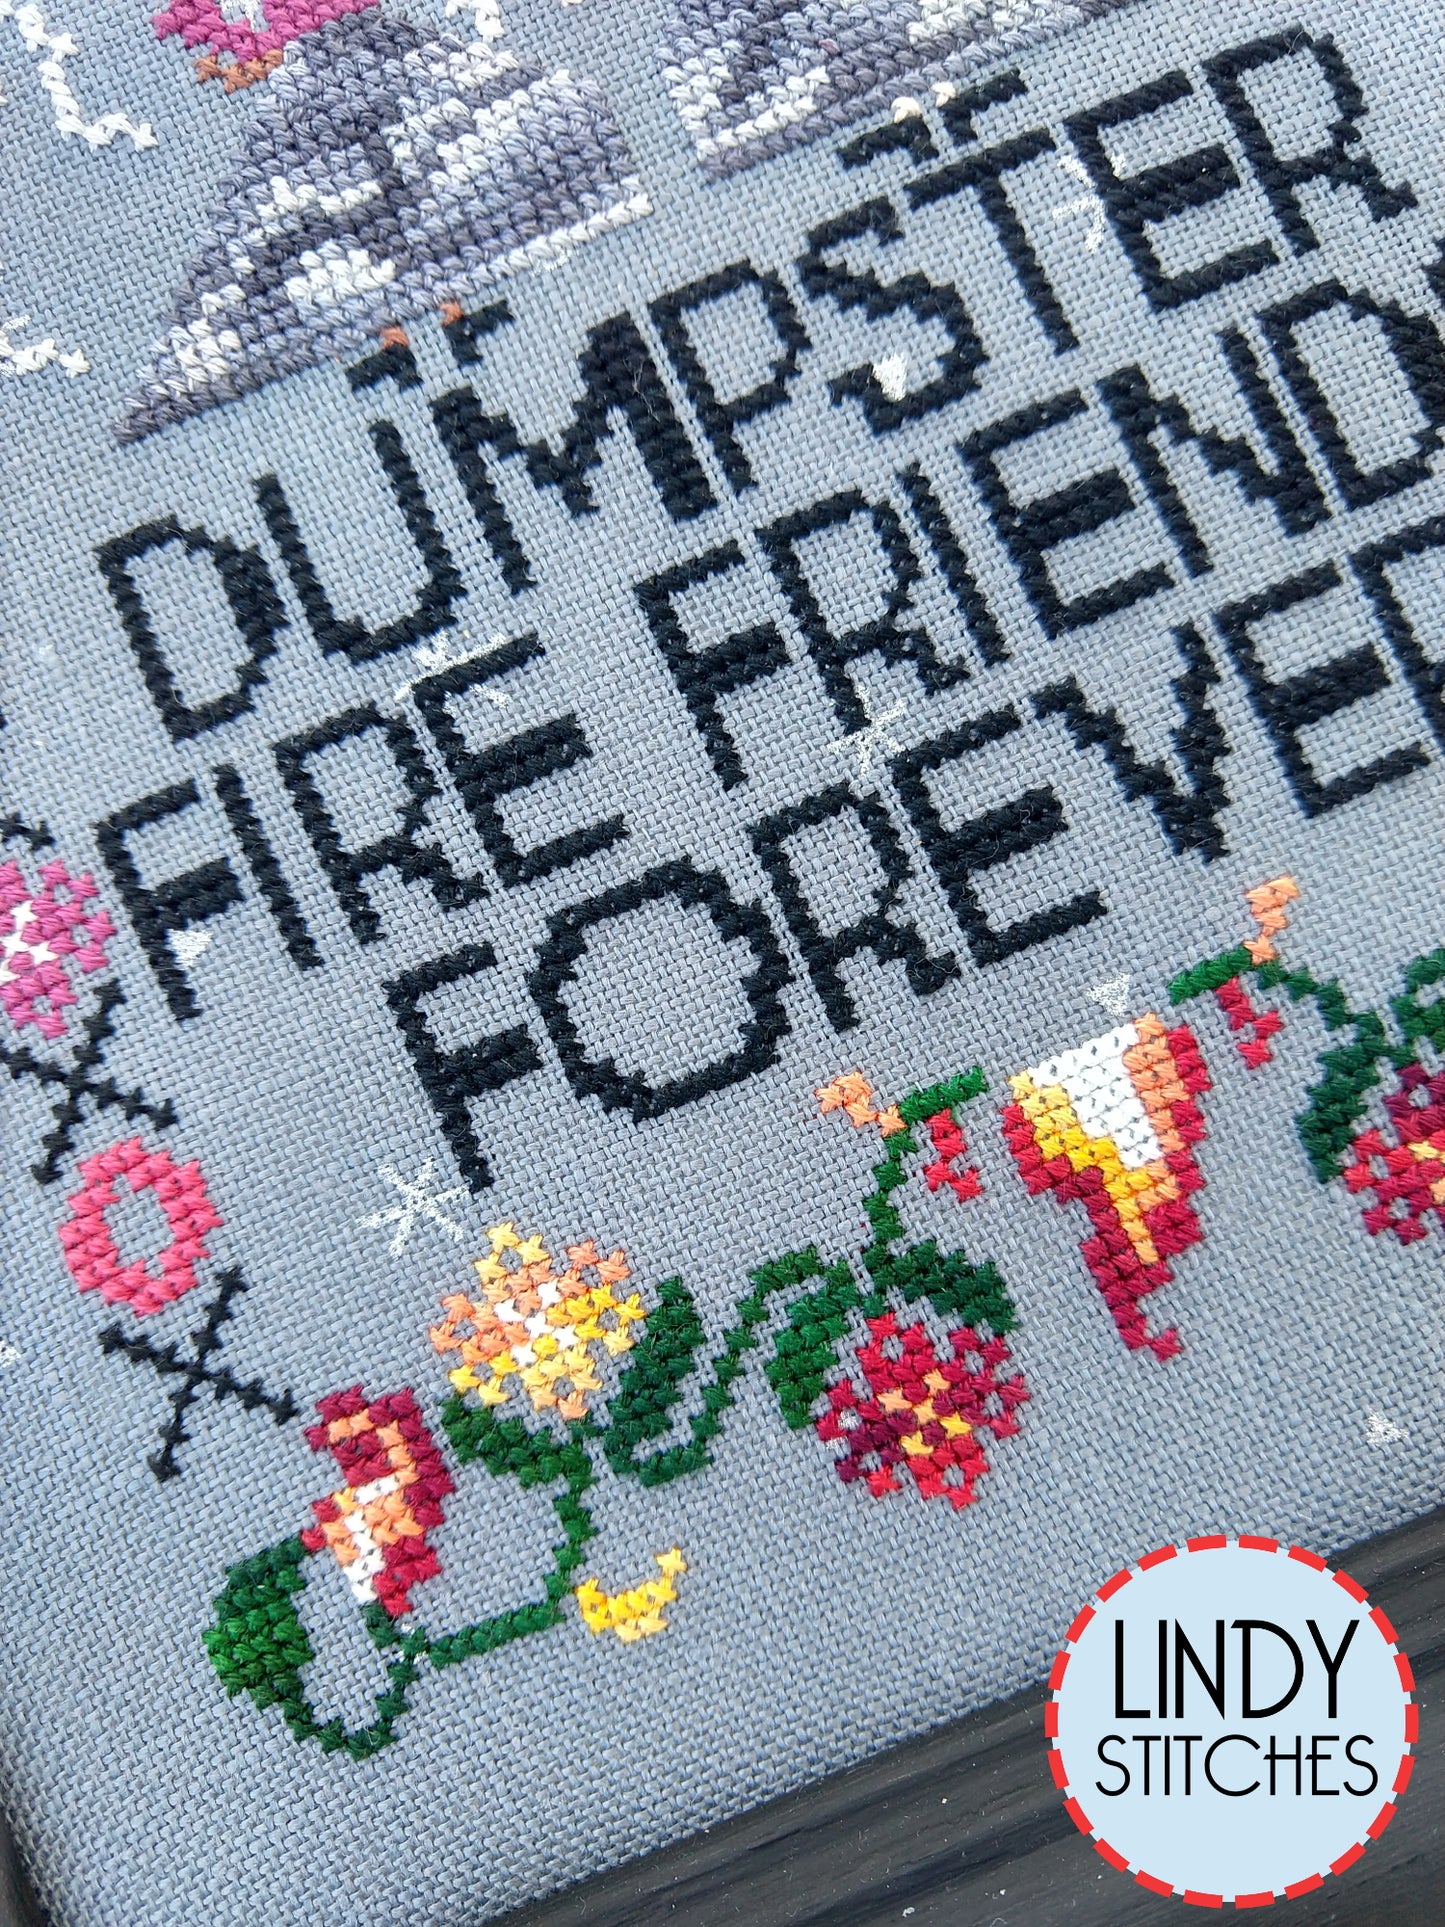 PDF Dumpster Fire Friends Forever Cross Stitch Pattern by Lindy Stitches